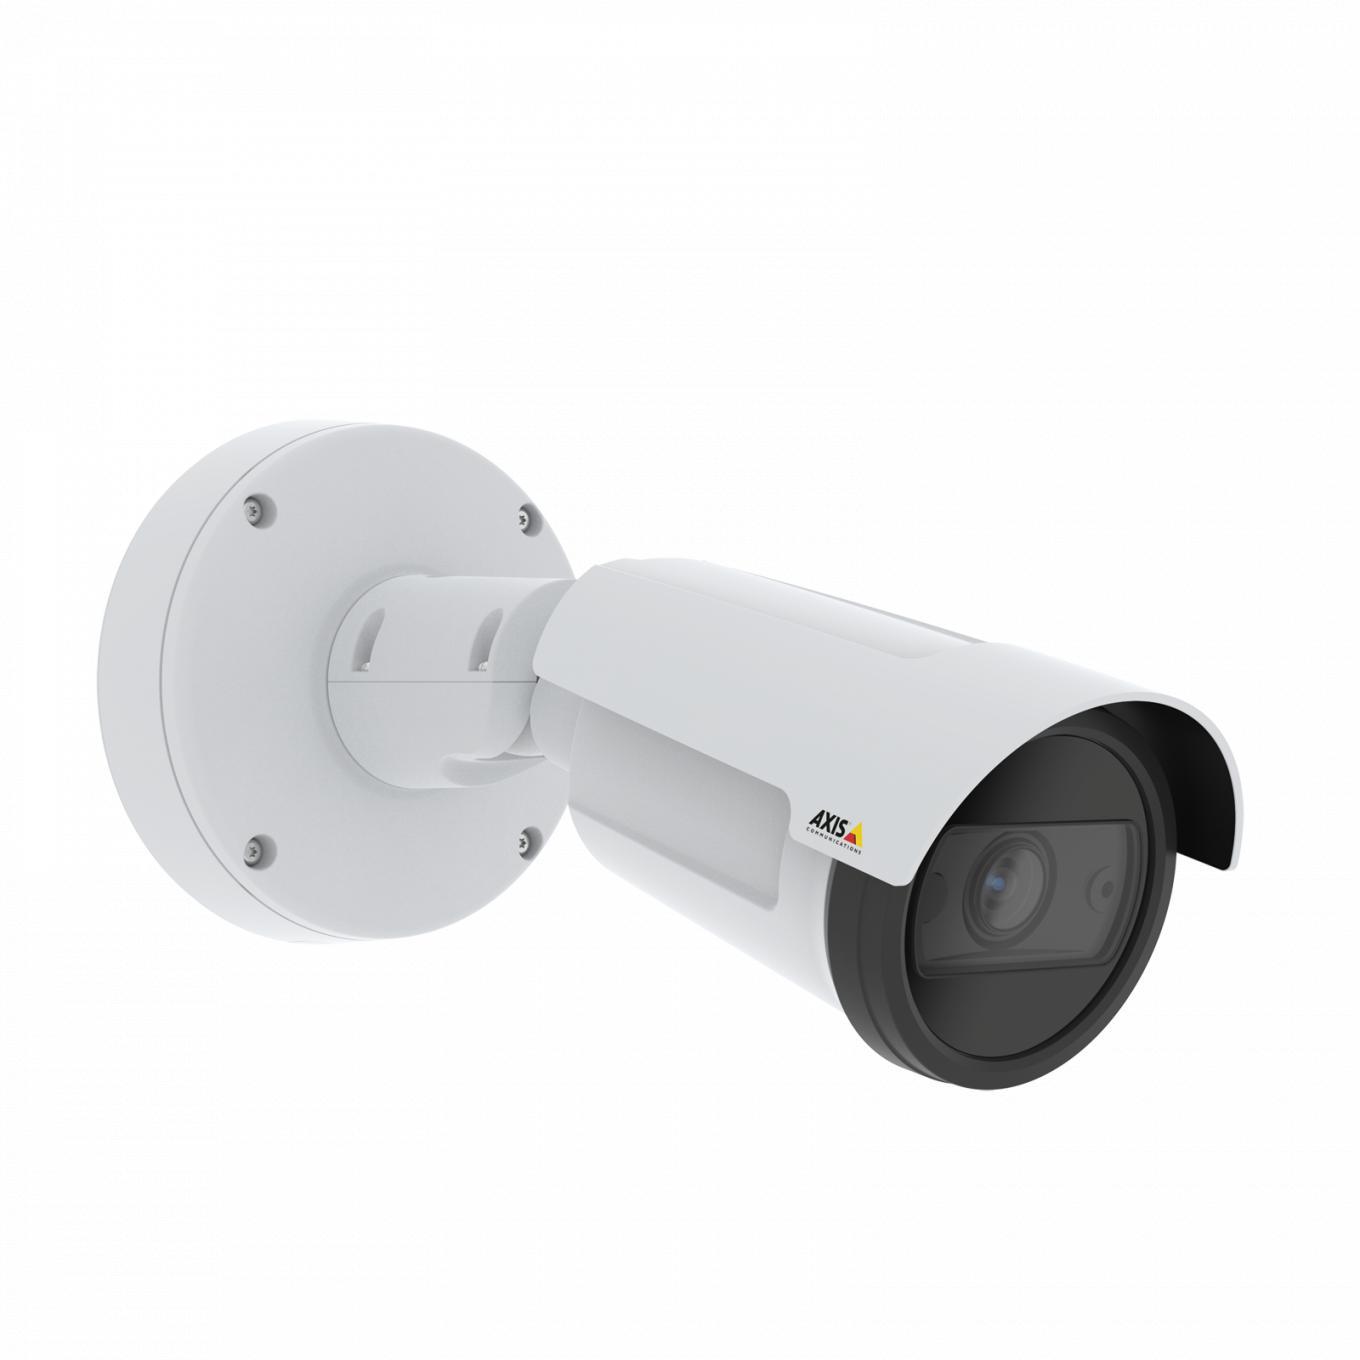 AXIS P1455-LE is an outdoor-ready fixed bullet IP camera with Lightfinder and Forensic WDR. The camera is viewed from its right angle.